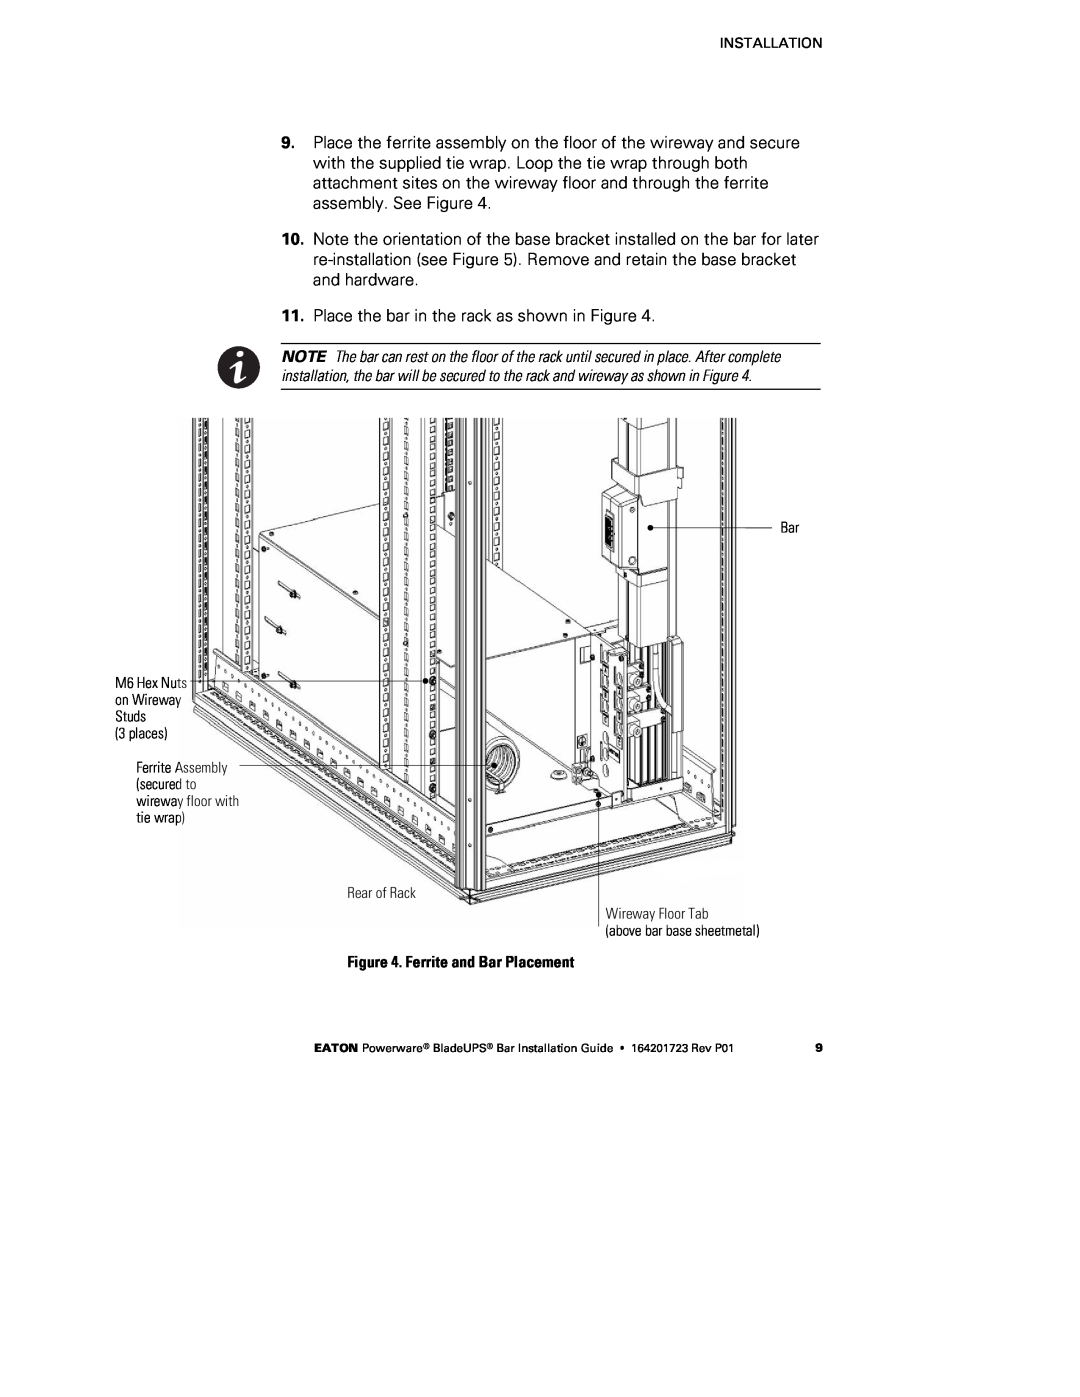 Eaton Electrical BladeUPS Bar manual Place the bar in the rack as shown in Figure 